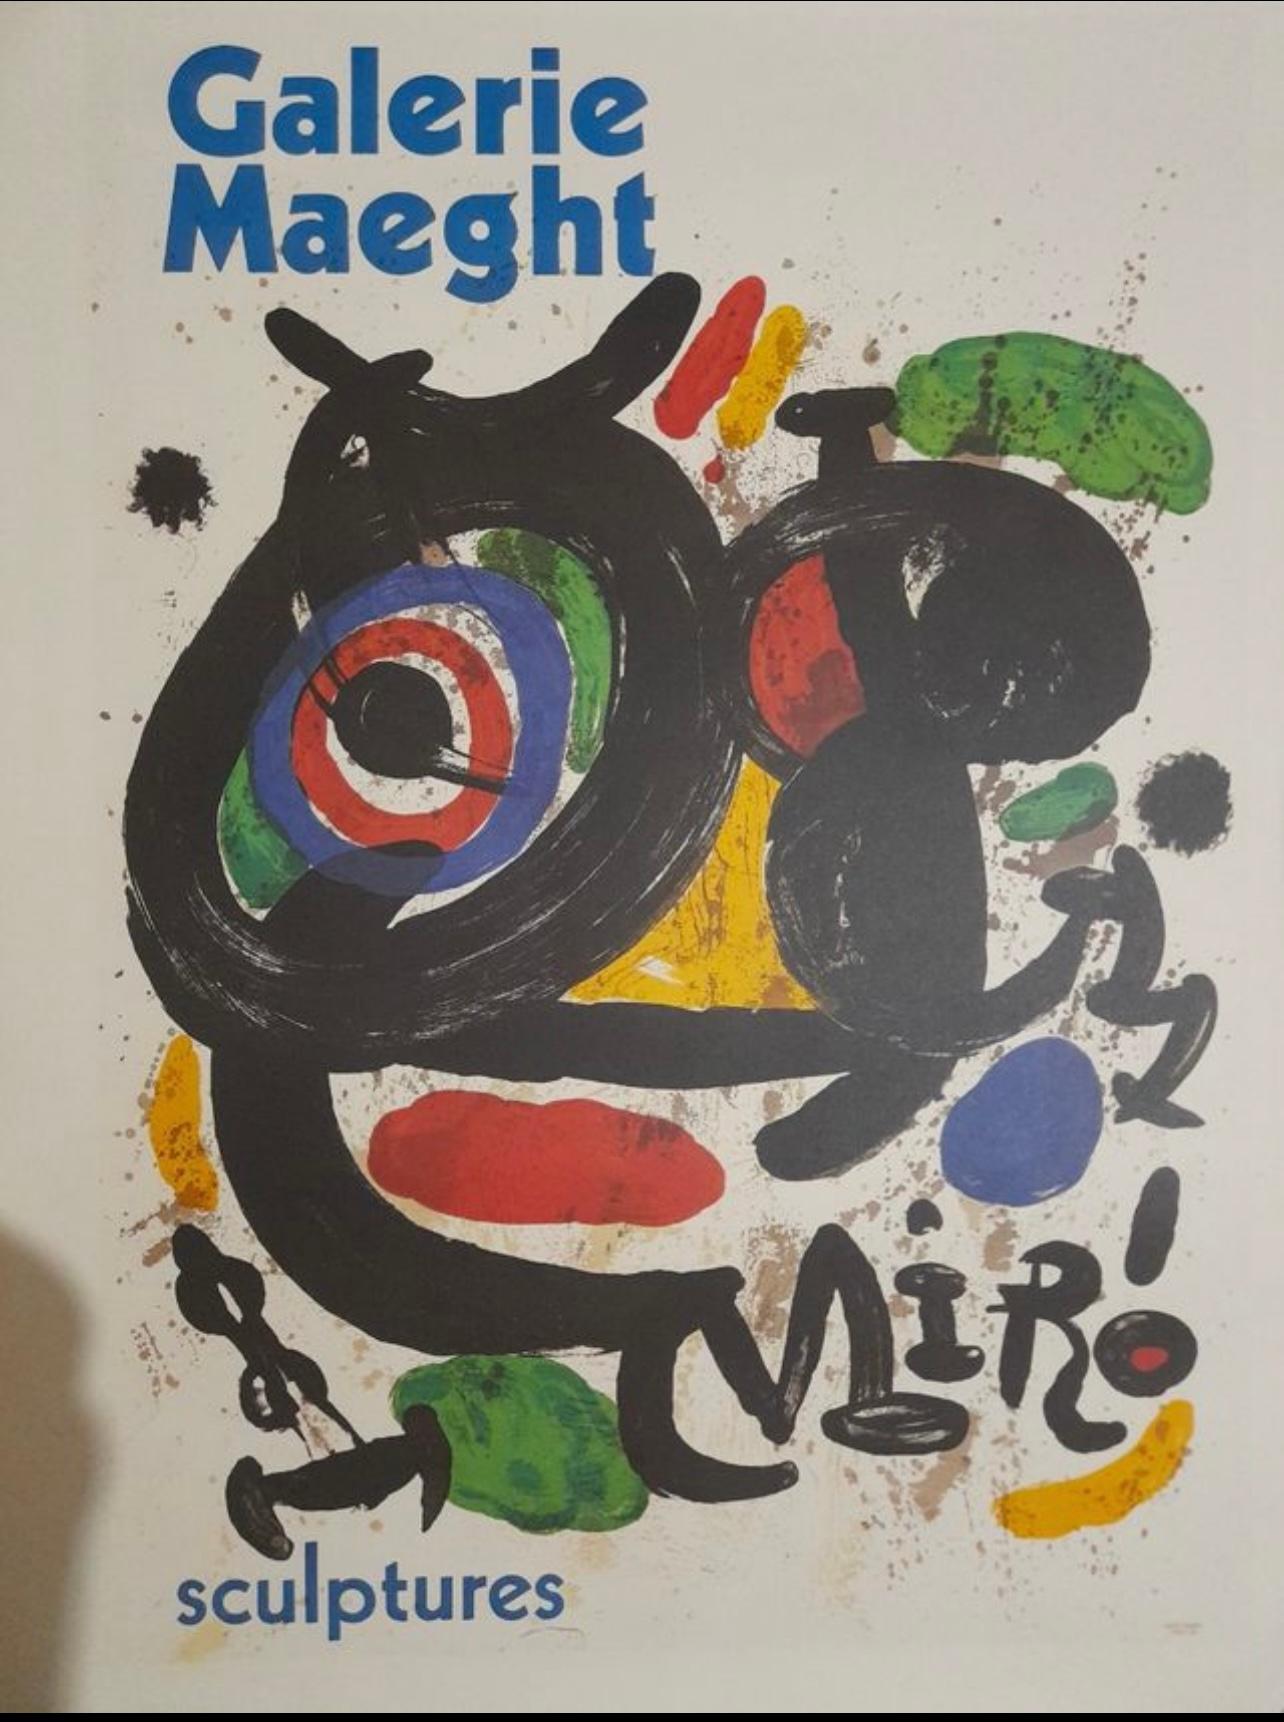 Joan Mirò - Sculptures is a lithographic poster realized period 1970s

 Occasion of one of his exhibitions at Galerie Maeght.

Offset and Lithograph.

Very Good conditions.